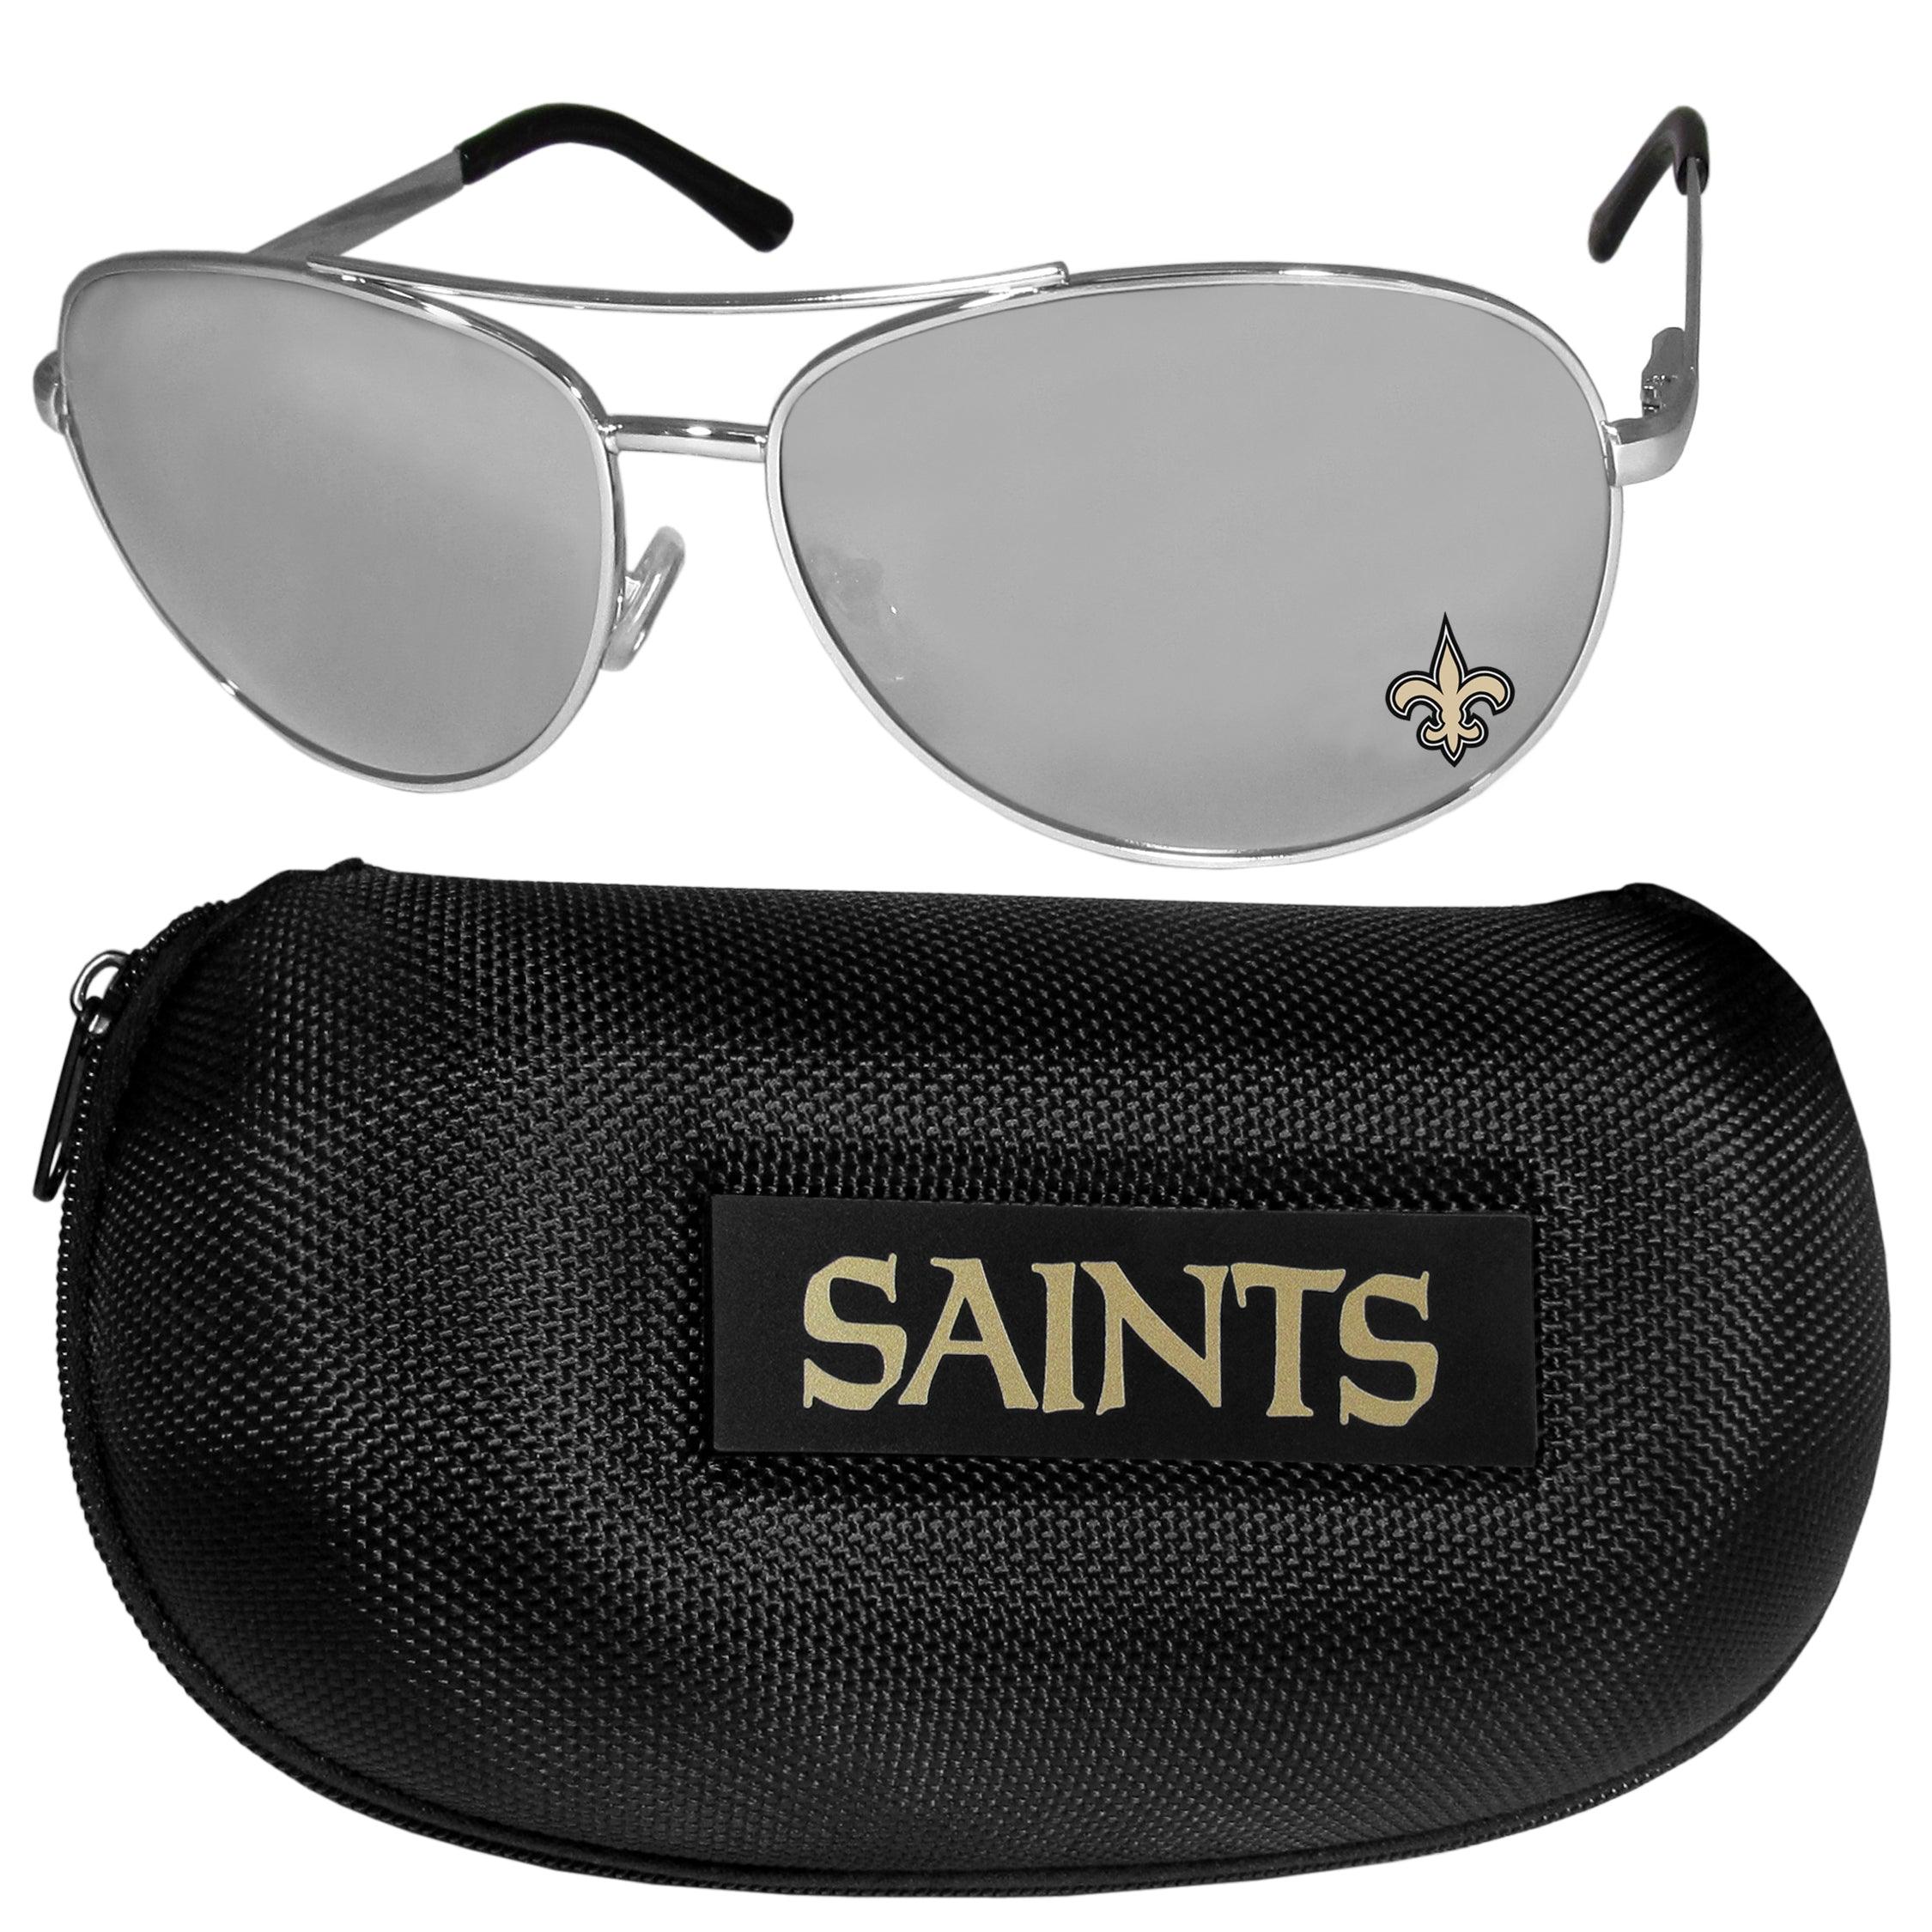 New Orleans Saints Aviator Sunglasses and Case - Flyclothing LLC